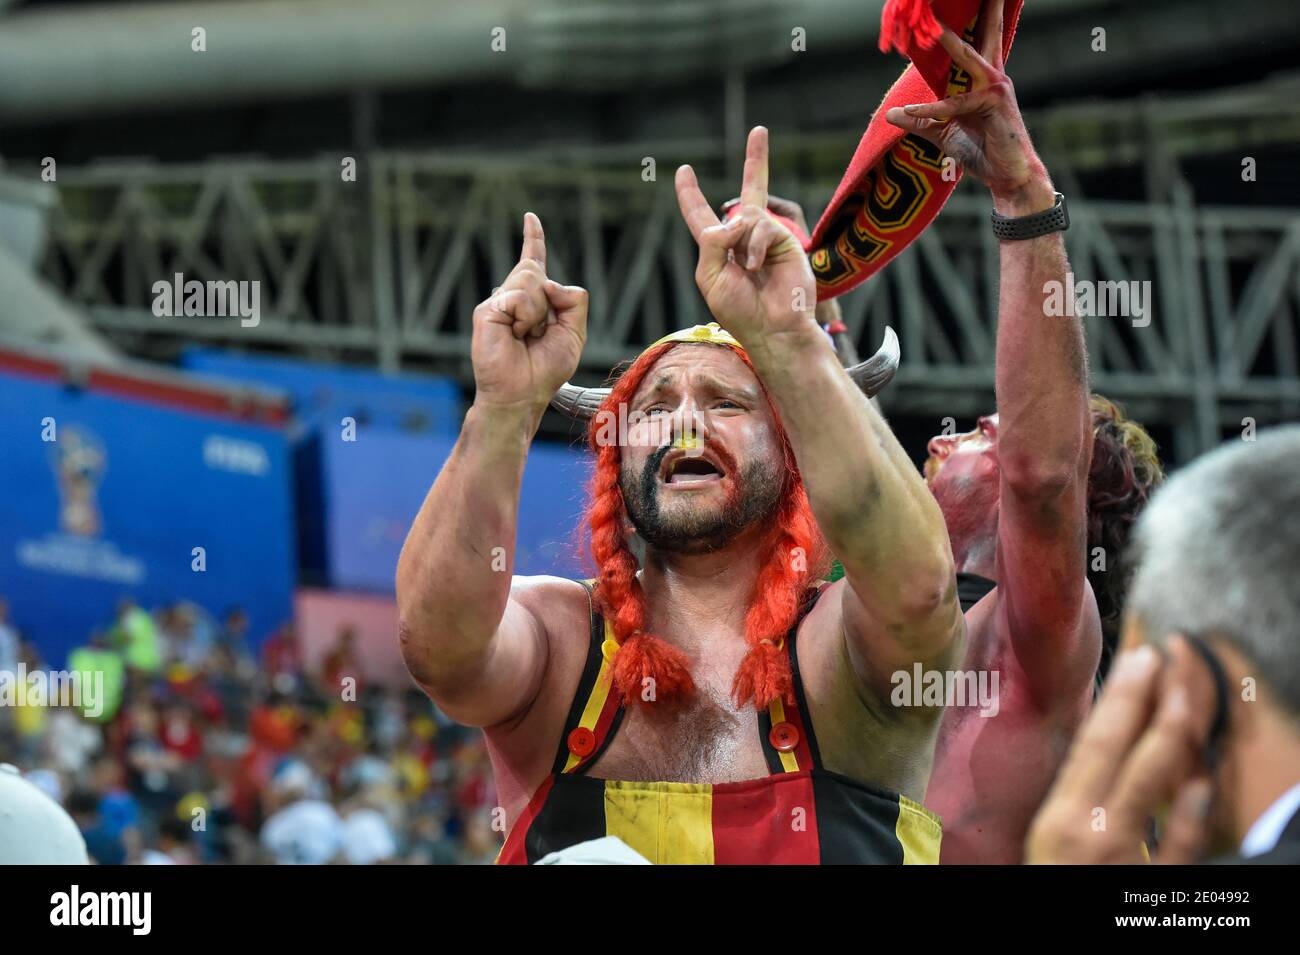 KAZAN, RUSSIA 6 July 2018: A Belgium supporter, dressed as French comic book character Obelix, celebrate their victory during the Russia 2018 World Cu Stock Photo